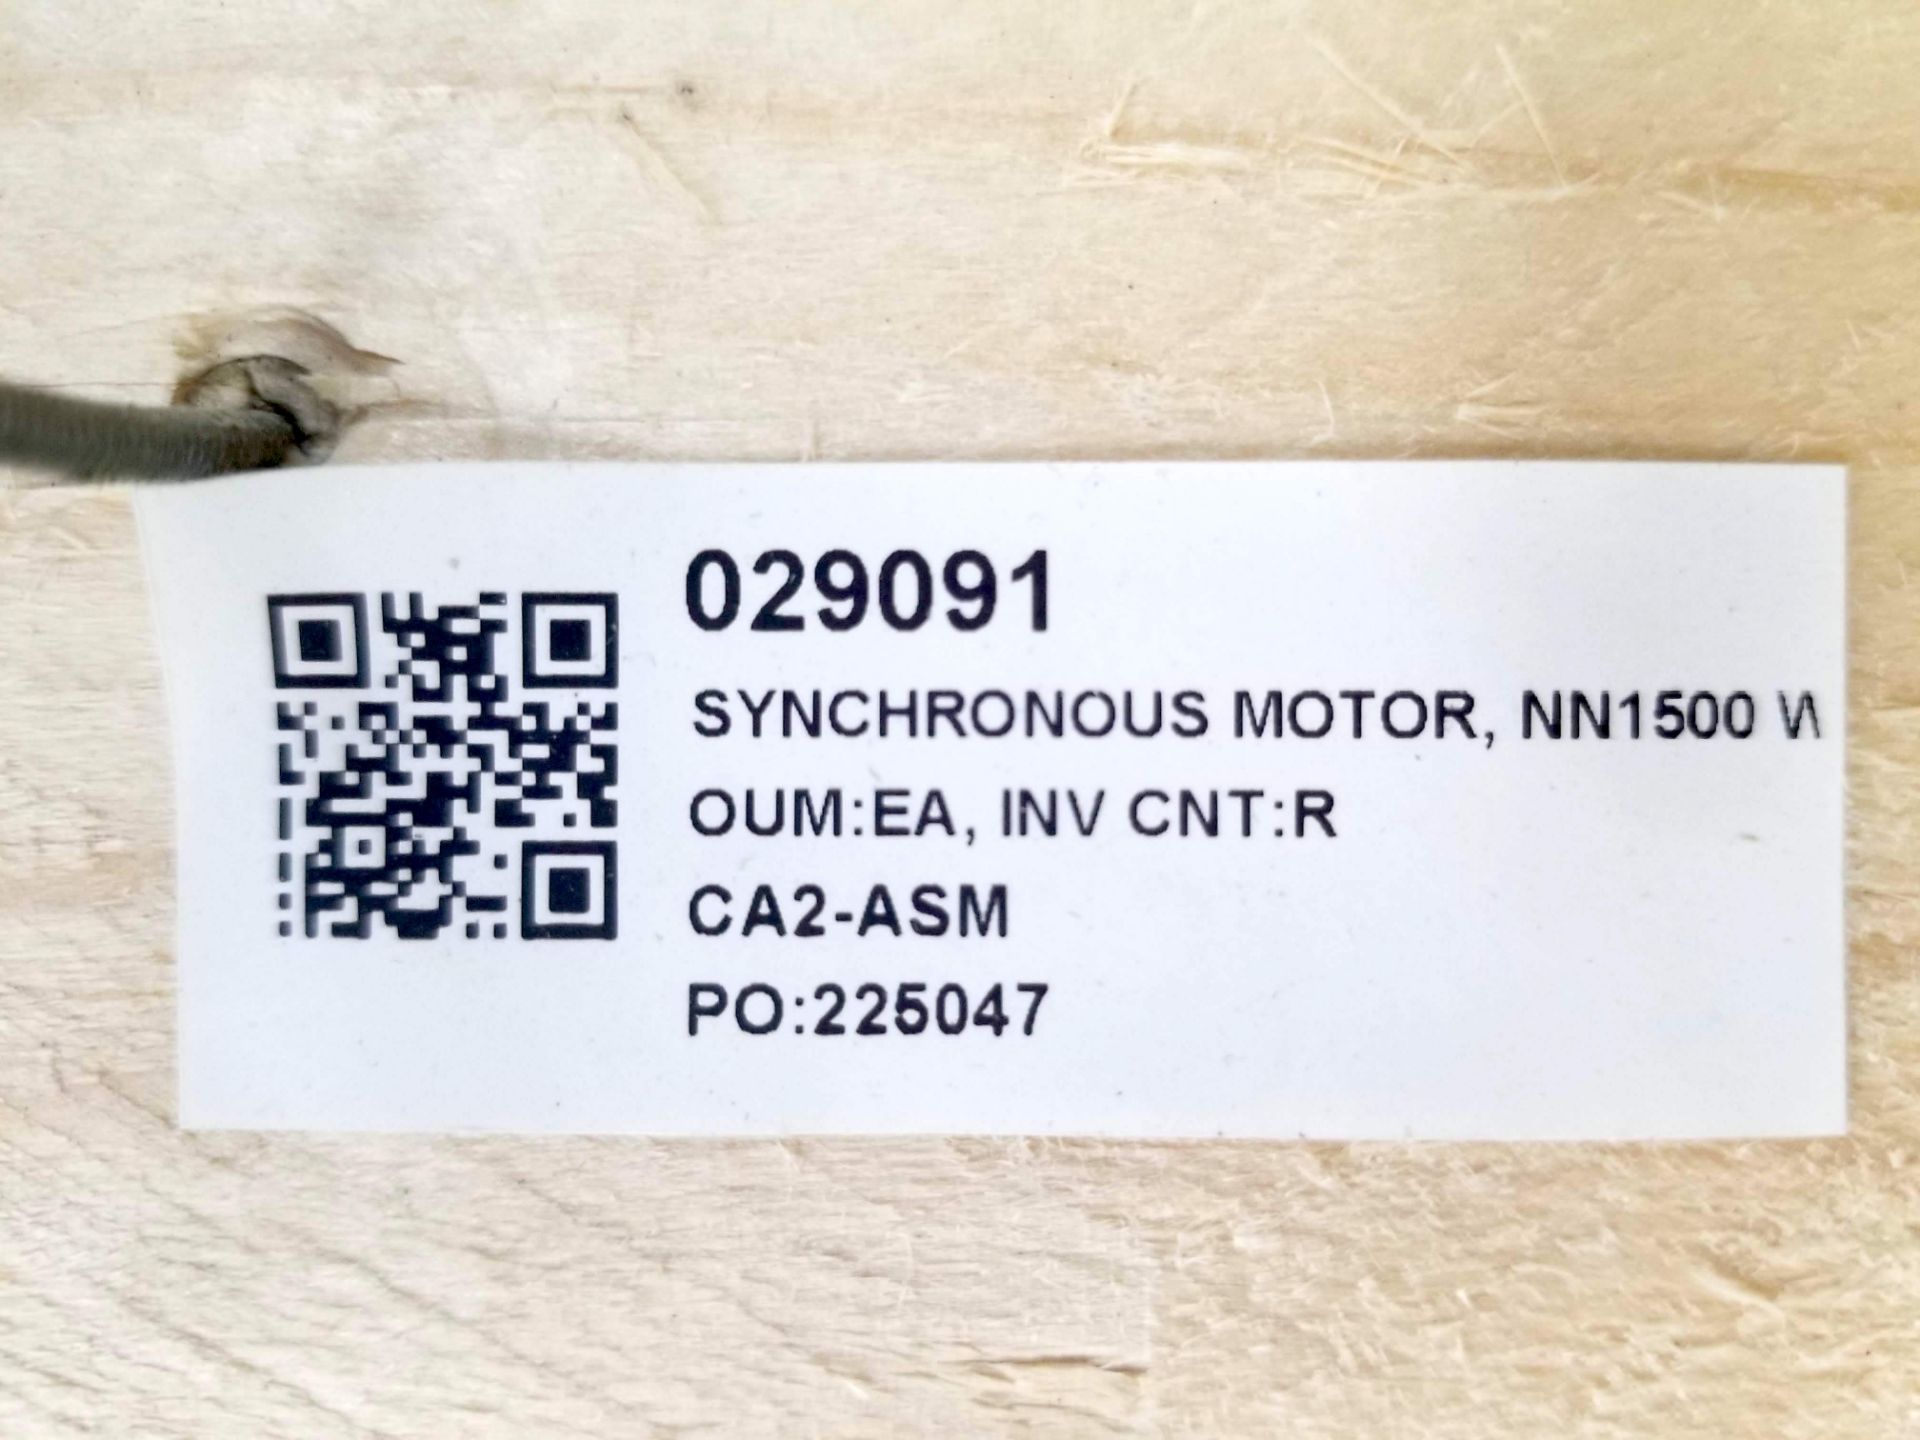 B&R SYNCHRONOUS MOTOR, NN1500 WITH BRAKE - Image 5 of 5